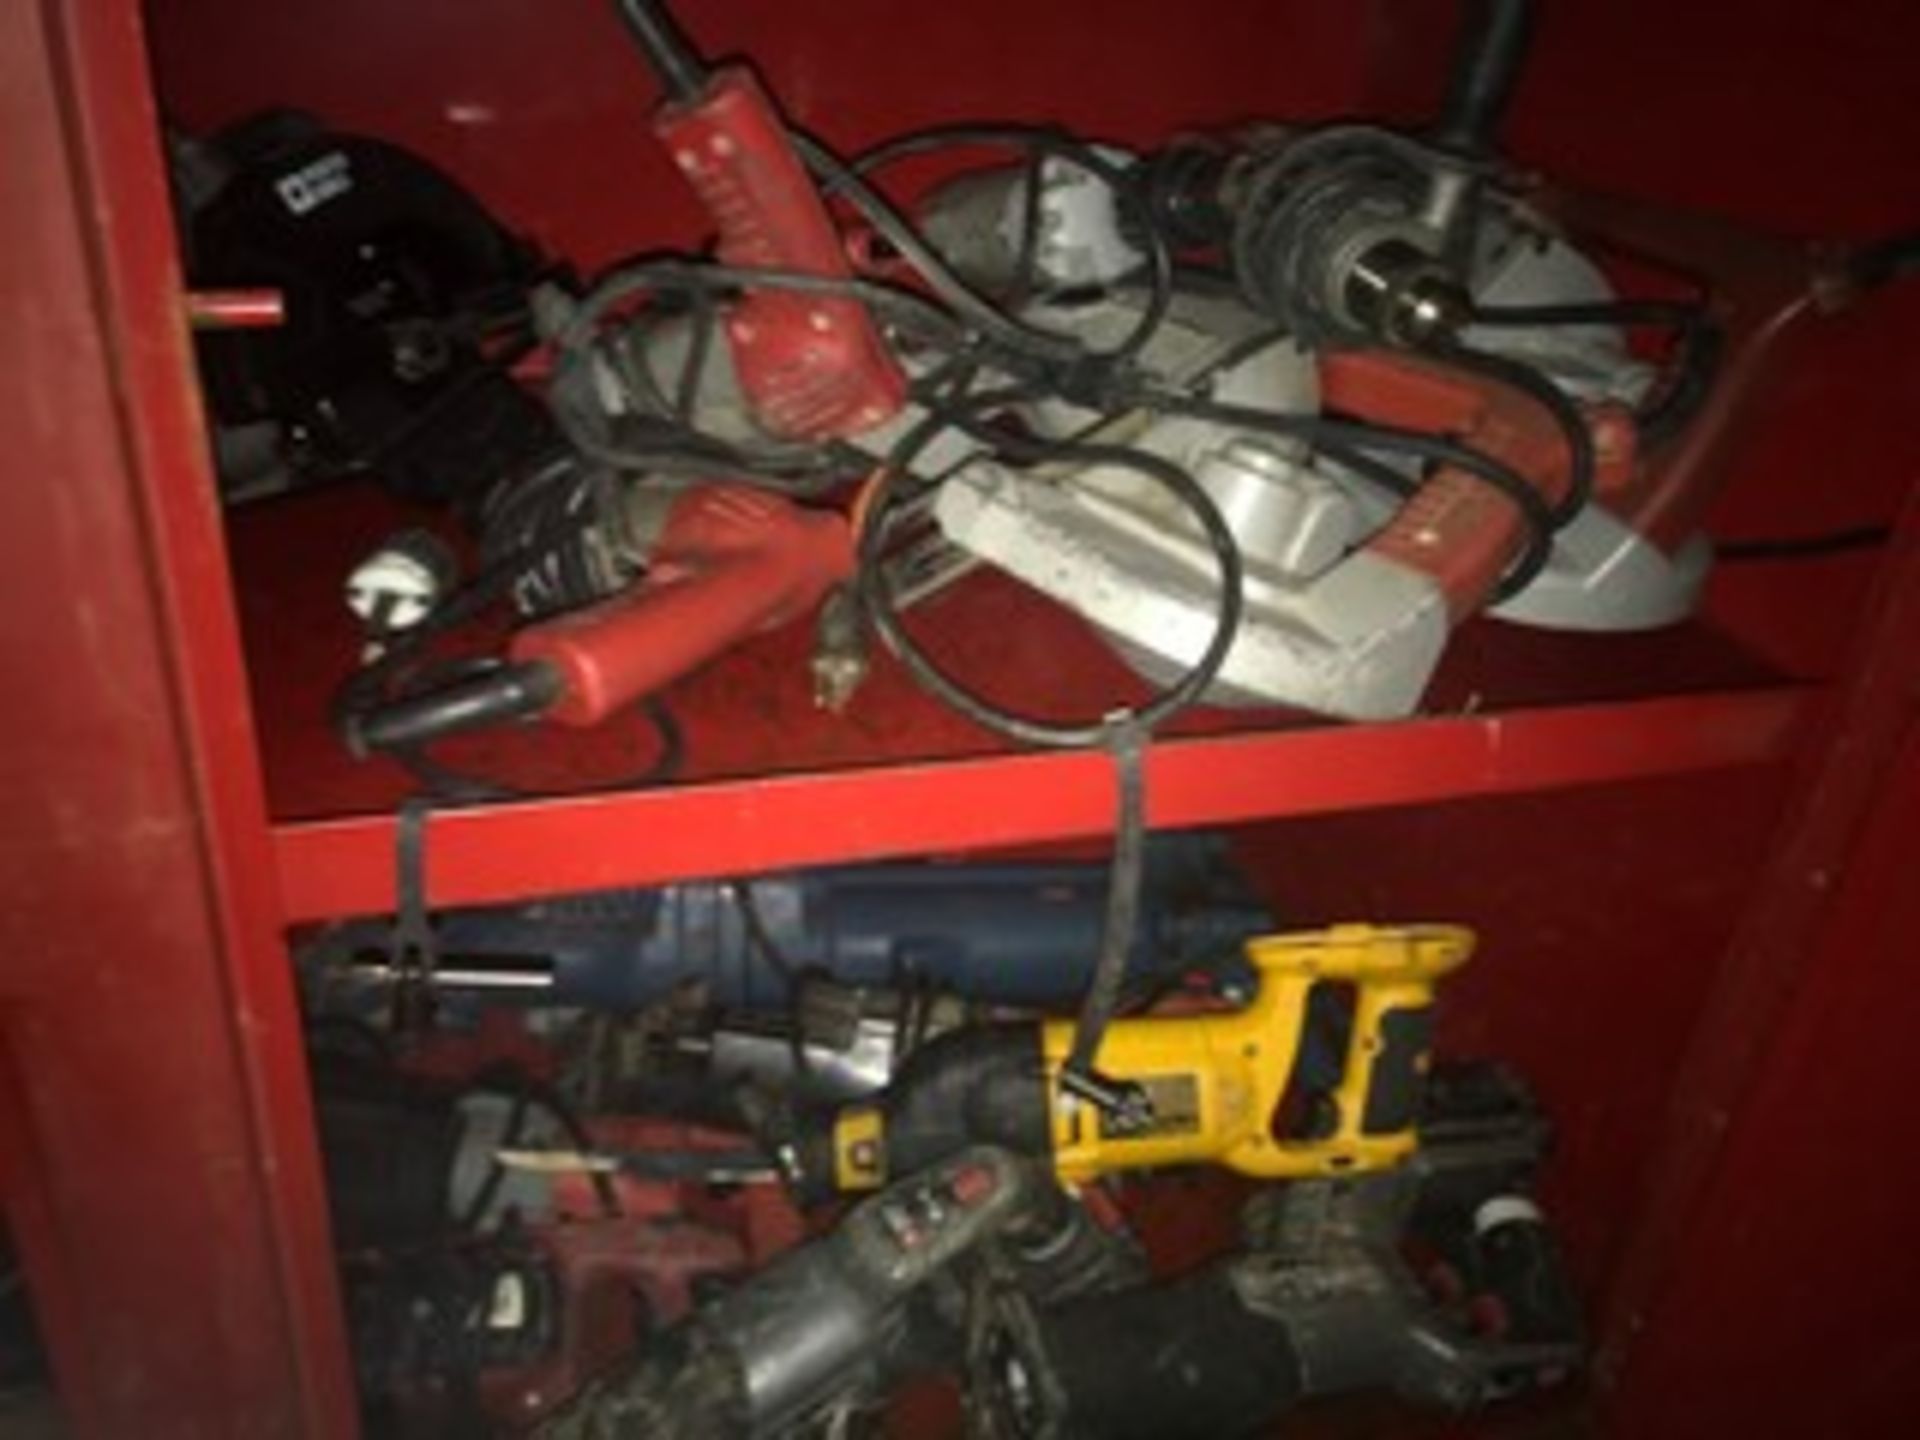 2-DOOR GB JOB BOX WITH CONTENTS -RATCHETING KNOCKOUT SETS, HILTI & RAMSET POWDER FASTENING GUNS - Image 5 of 6